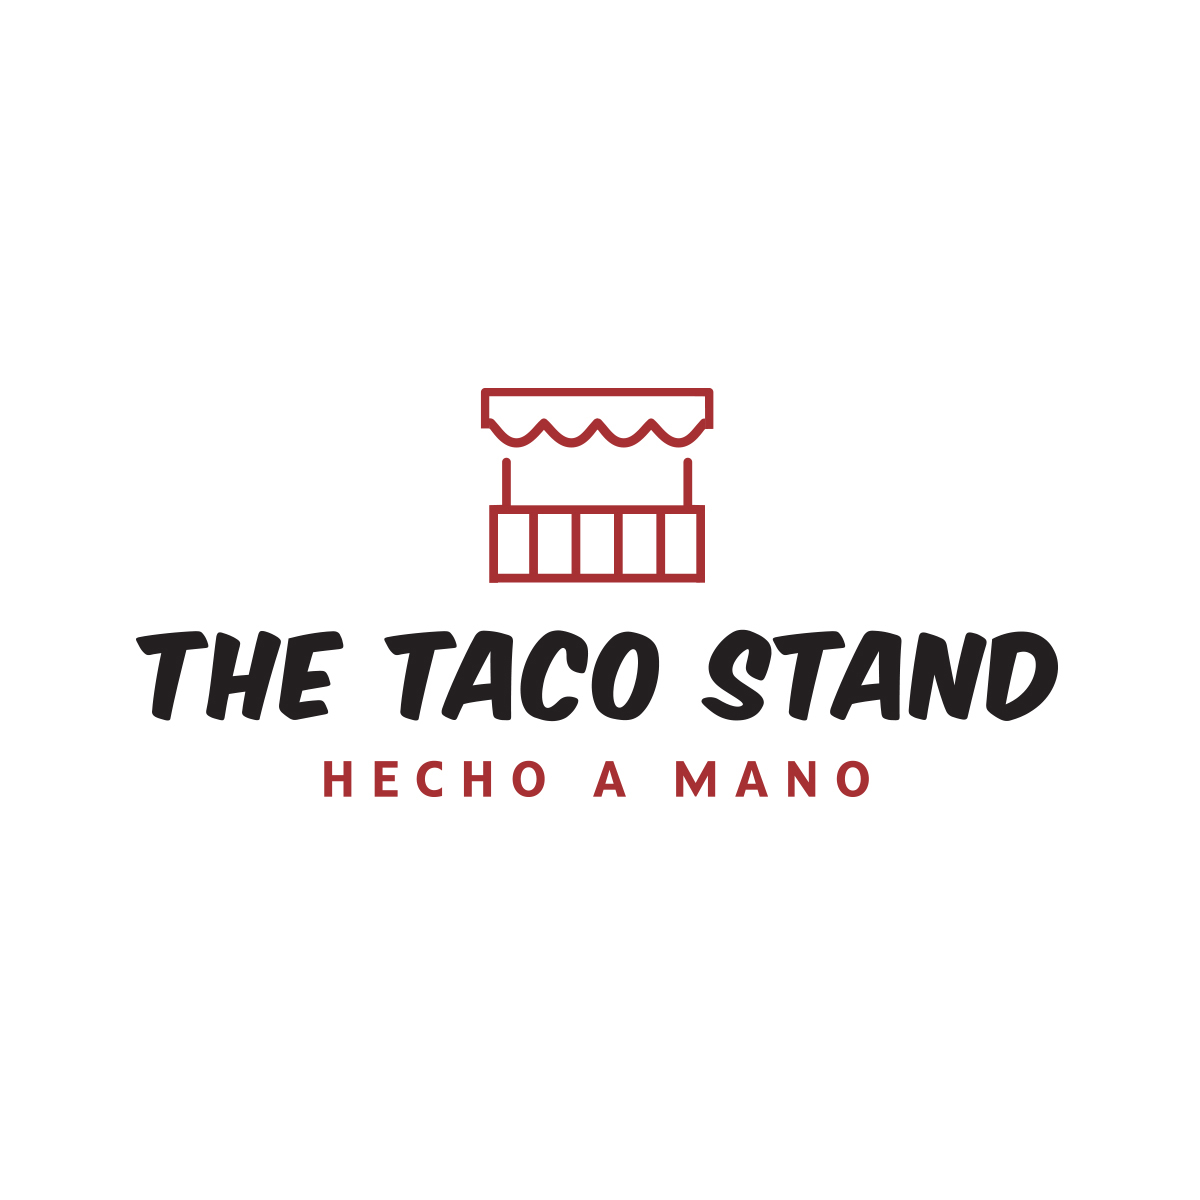 The Taco Stand